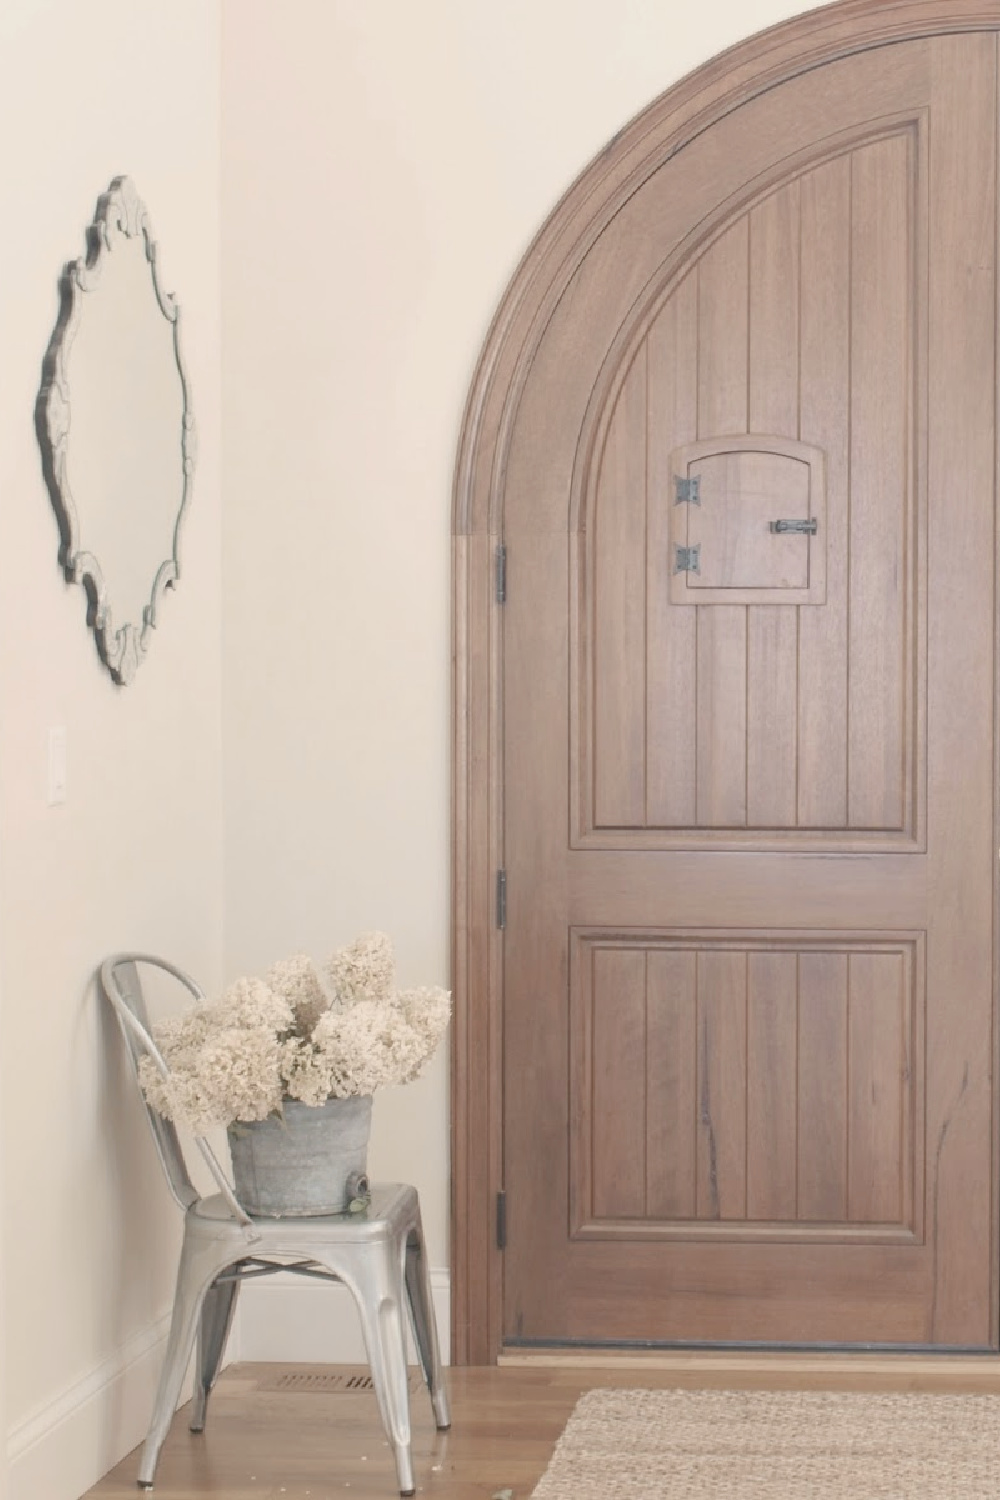 BM White Sand in a modern French entry hall with arched walnut front doors - Hello Lovely Studio. #bmwhitesand